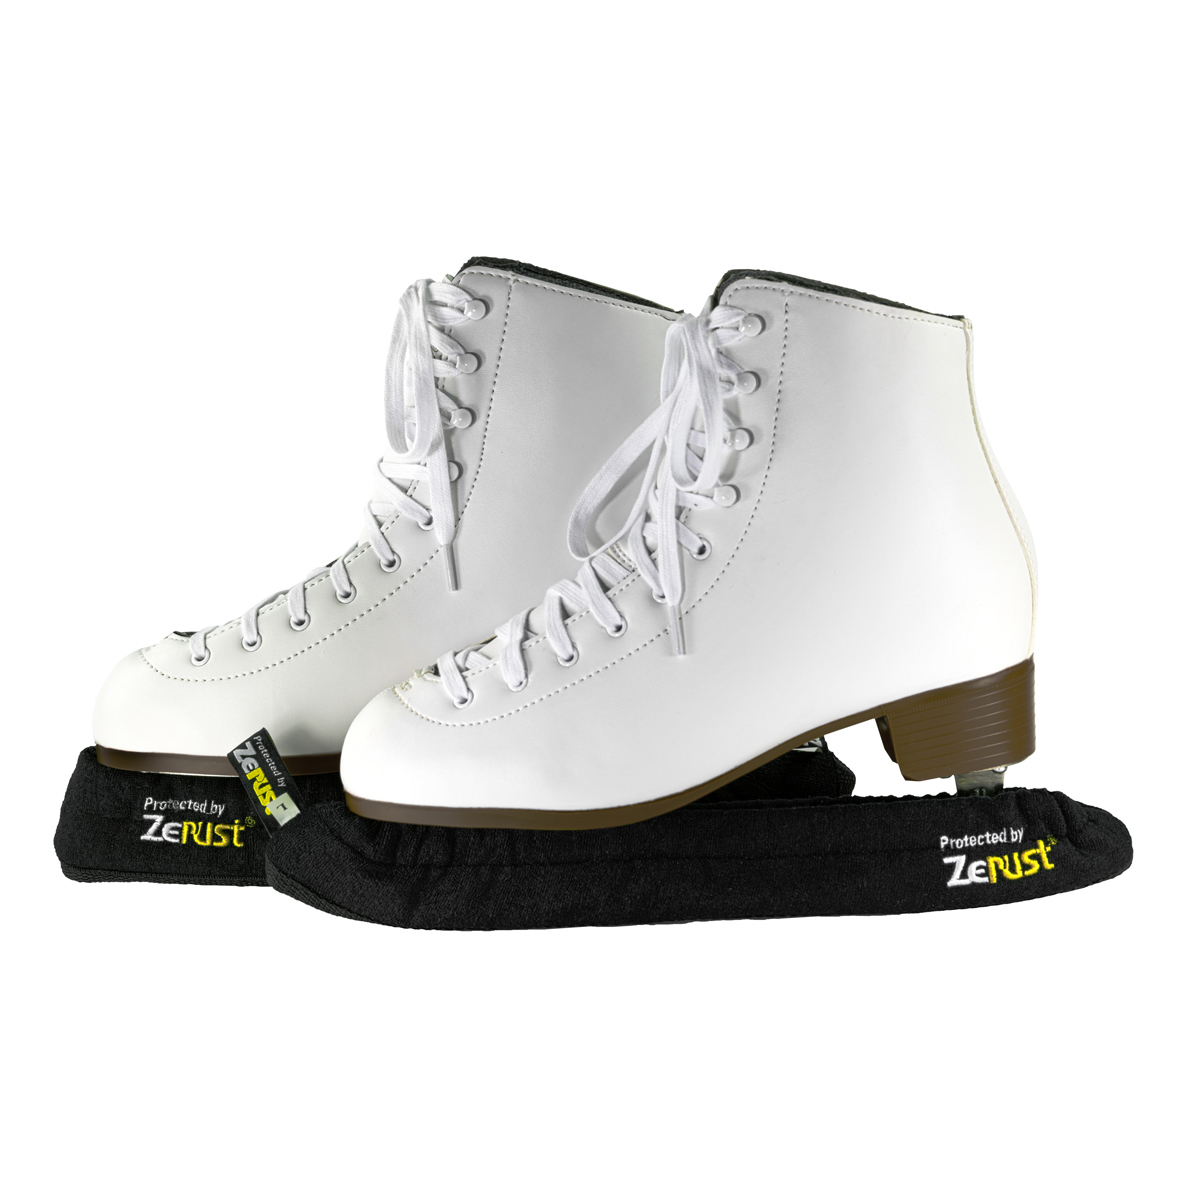 A pair of ice skates with blades covered by Zerust's skate covers.